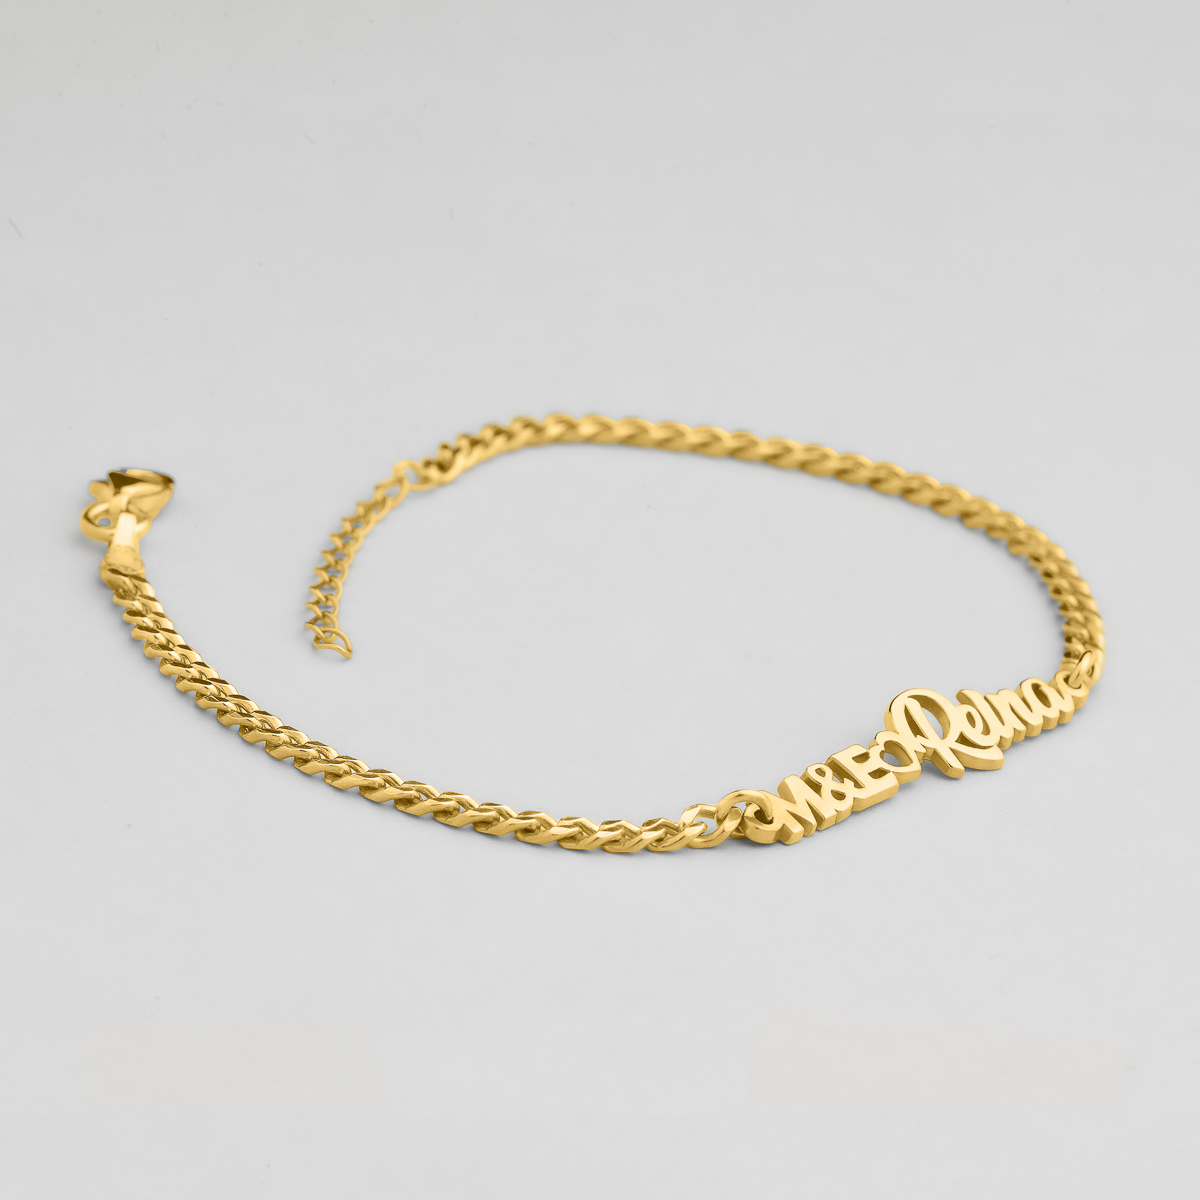 Pearl Chain Signature Name Bracelet - Gold